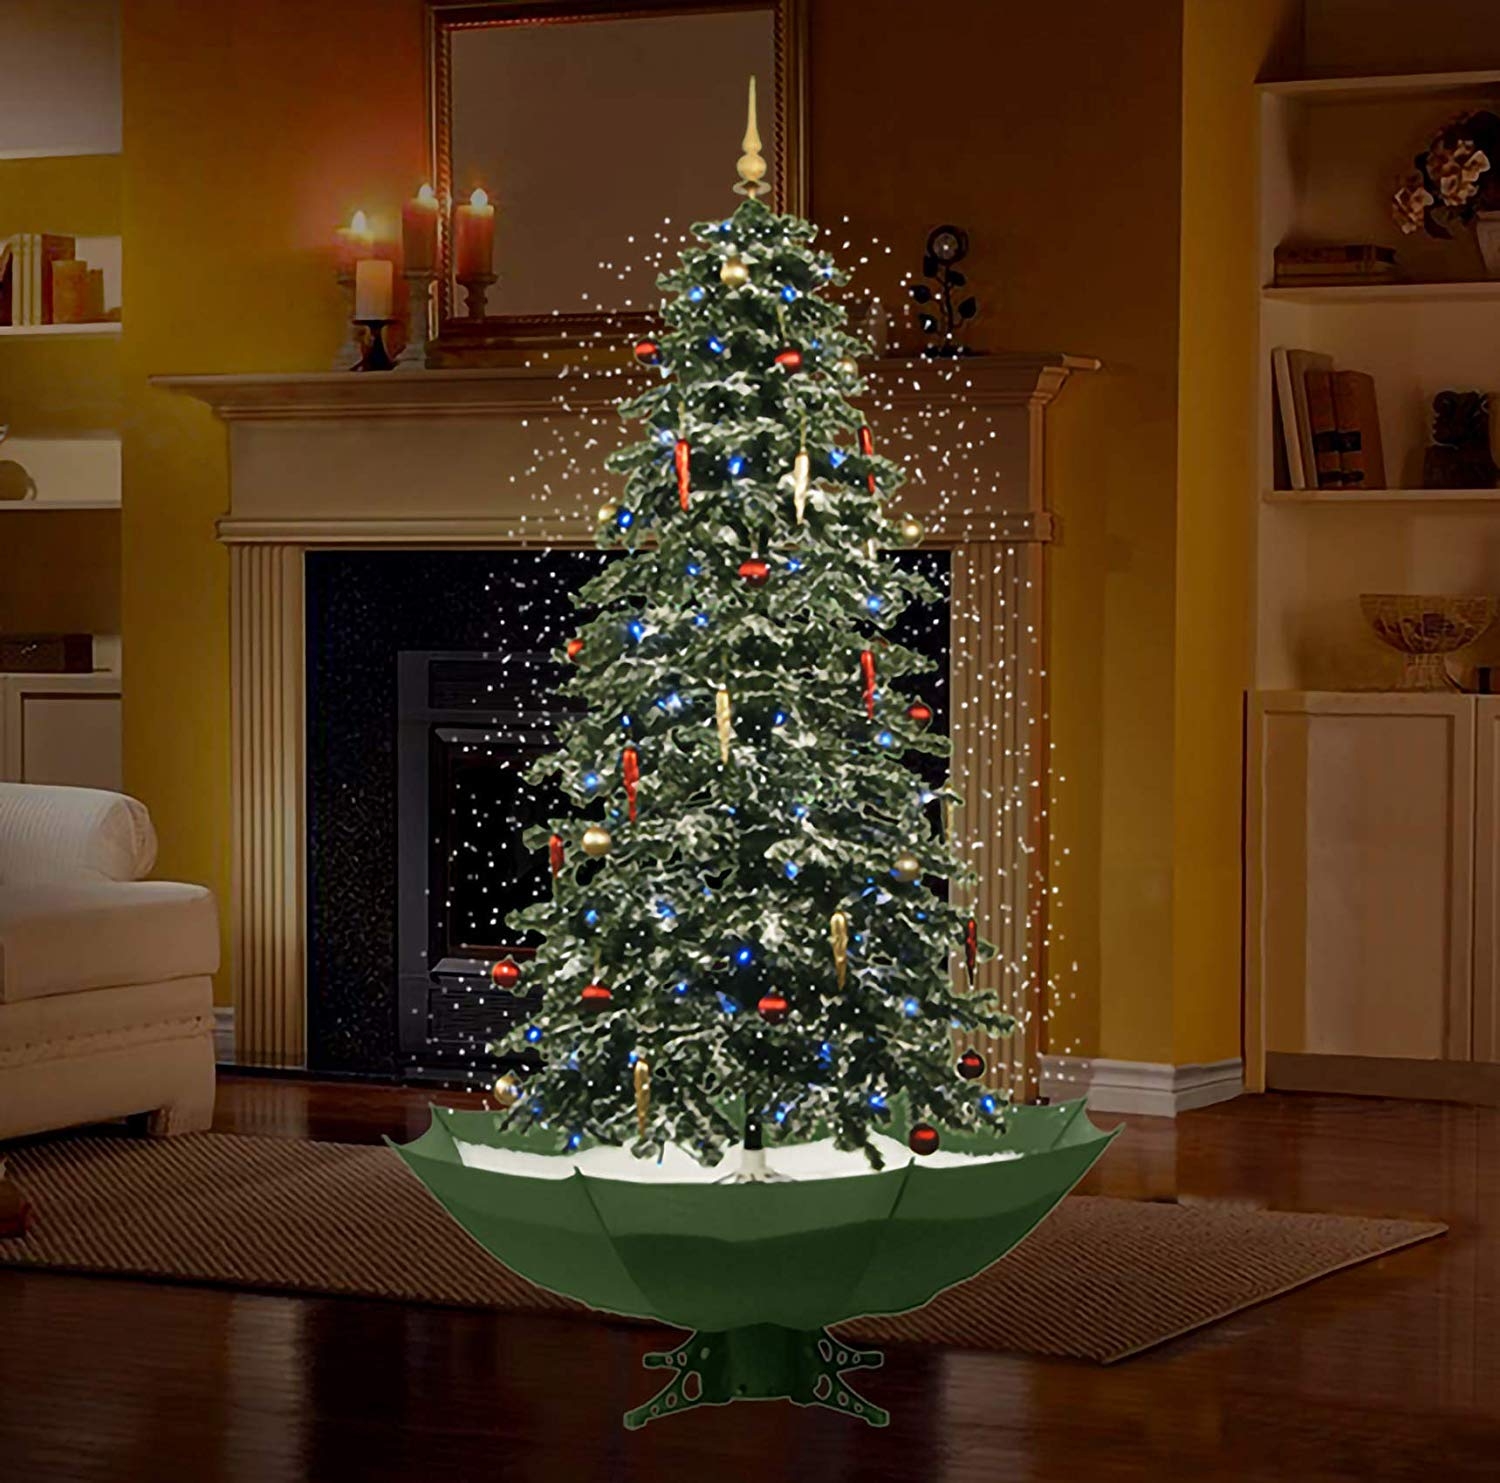 LED tree with artificial snowfall and ornaments  meters